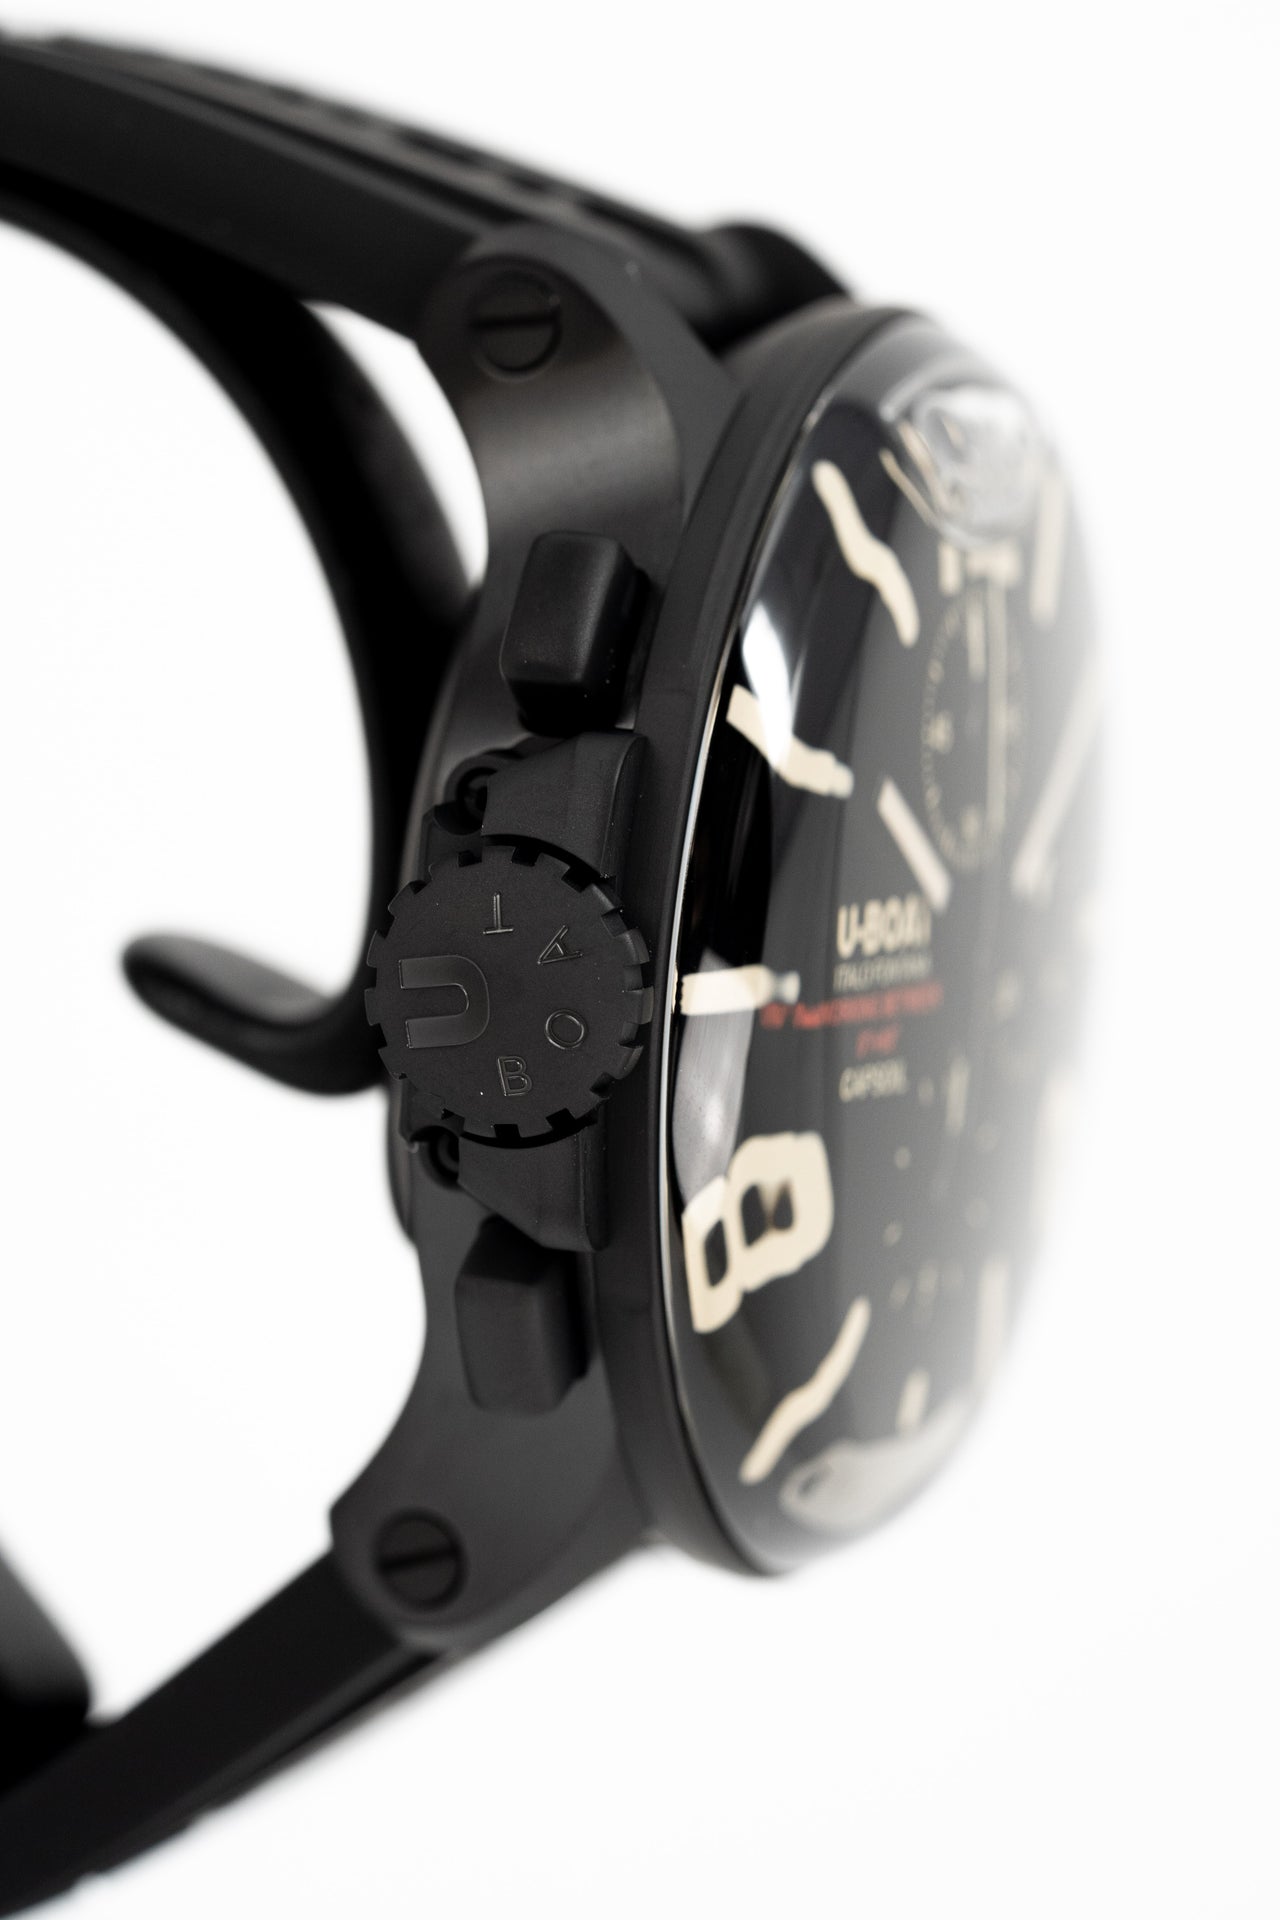 U-Boat Capsoil - The Innovative Watch Filled with Oil!, News